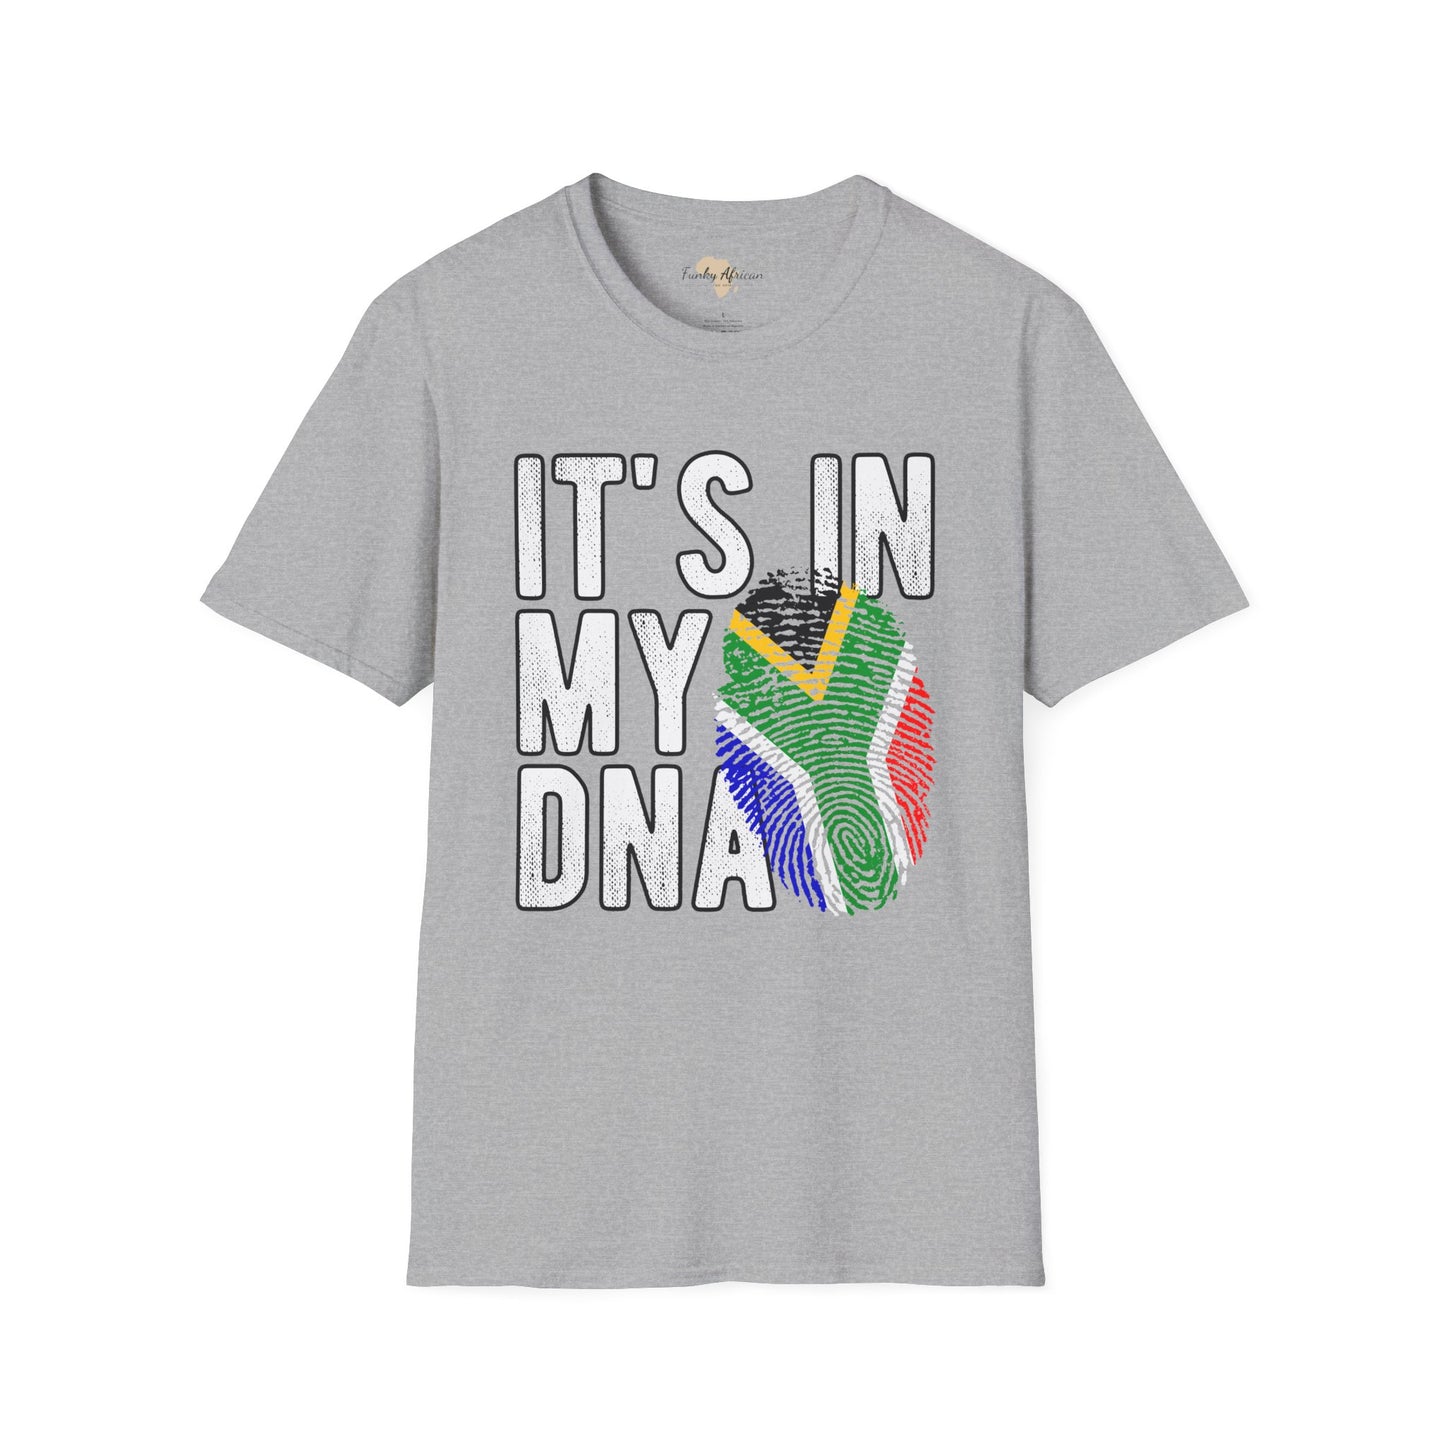 it's in my DNA unisex tee - South Africa